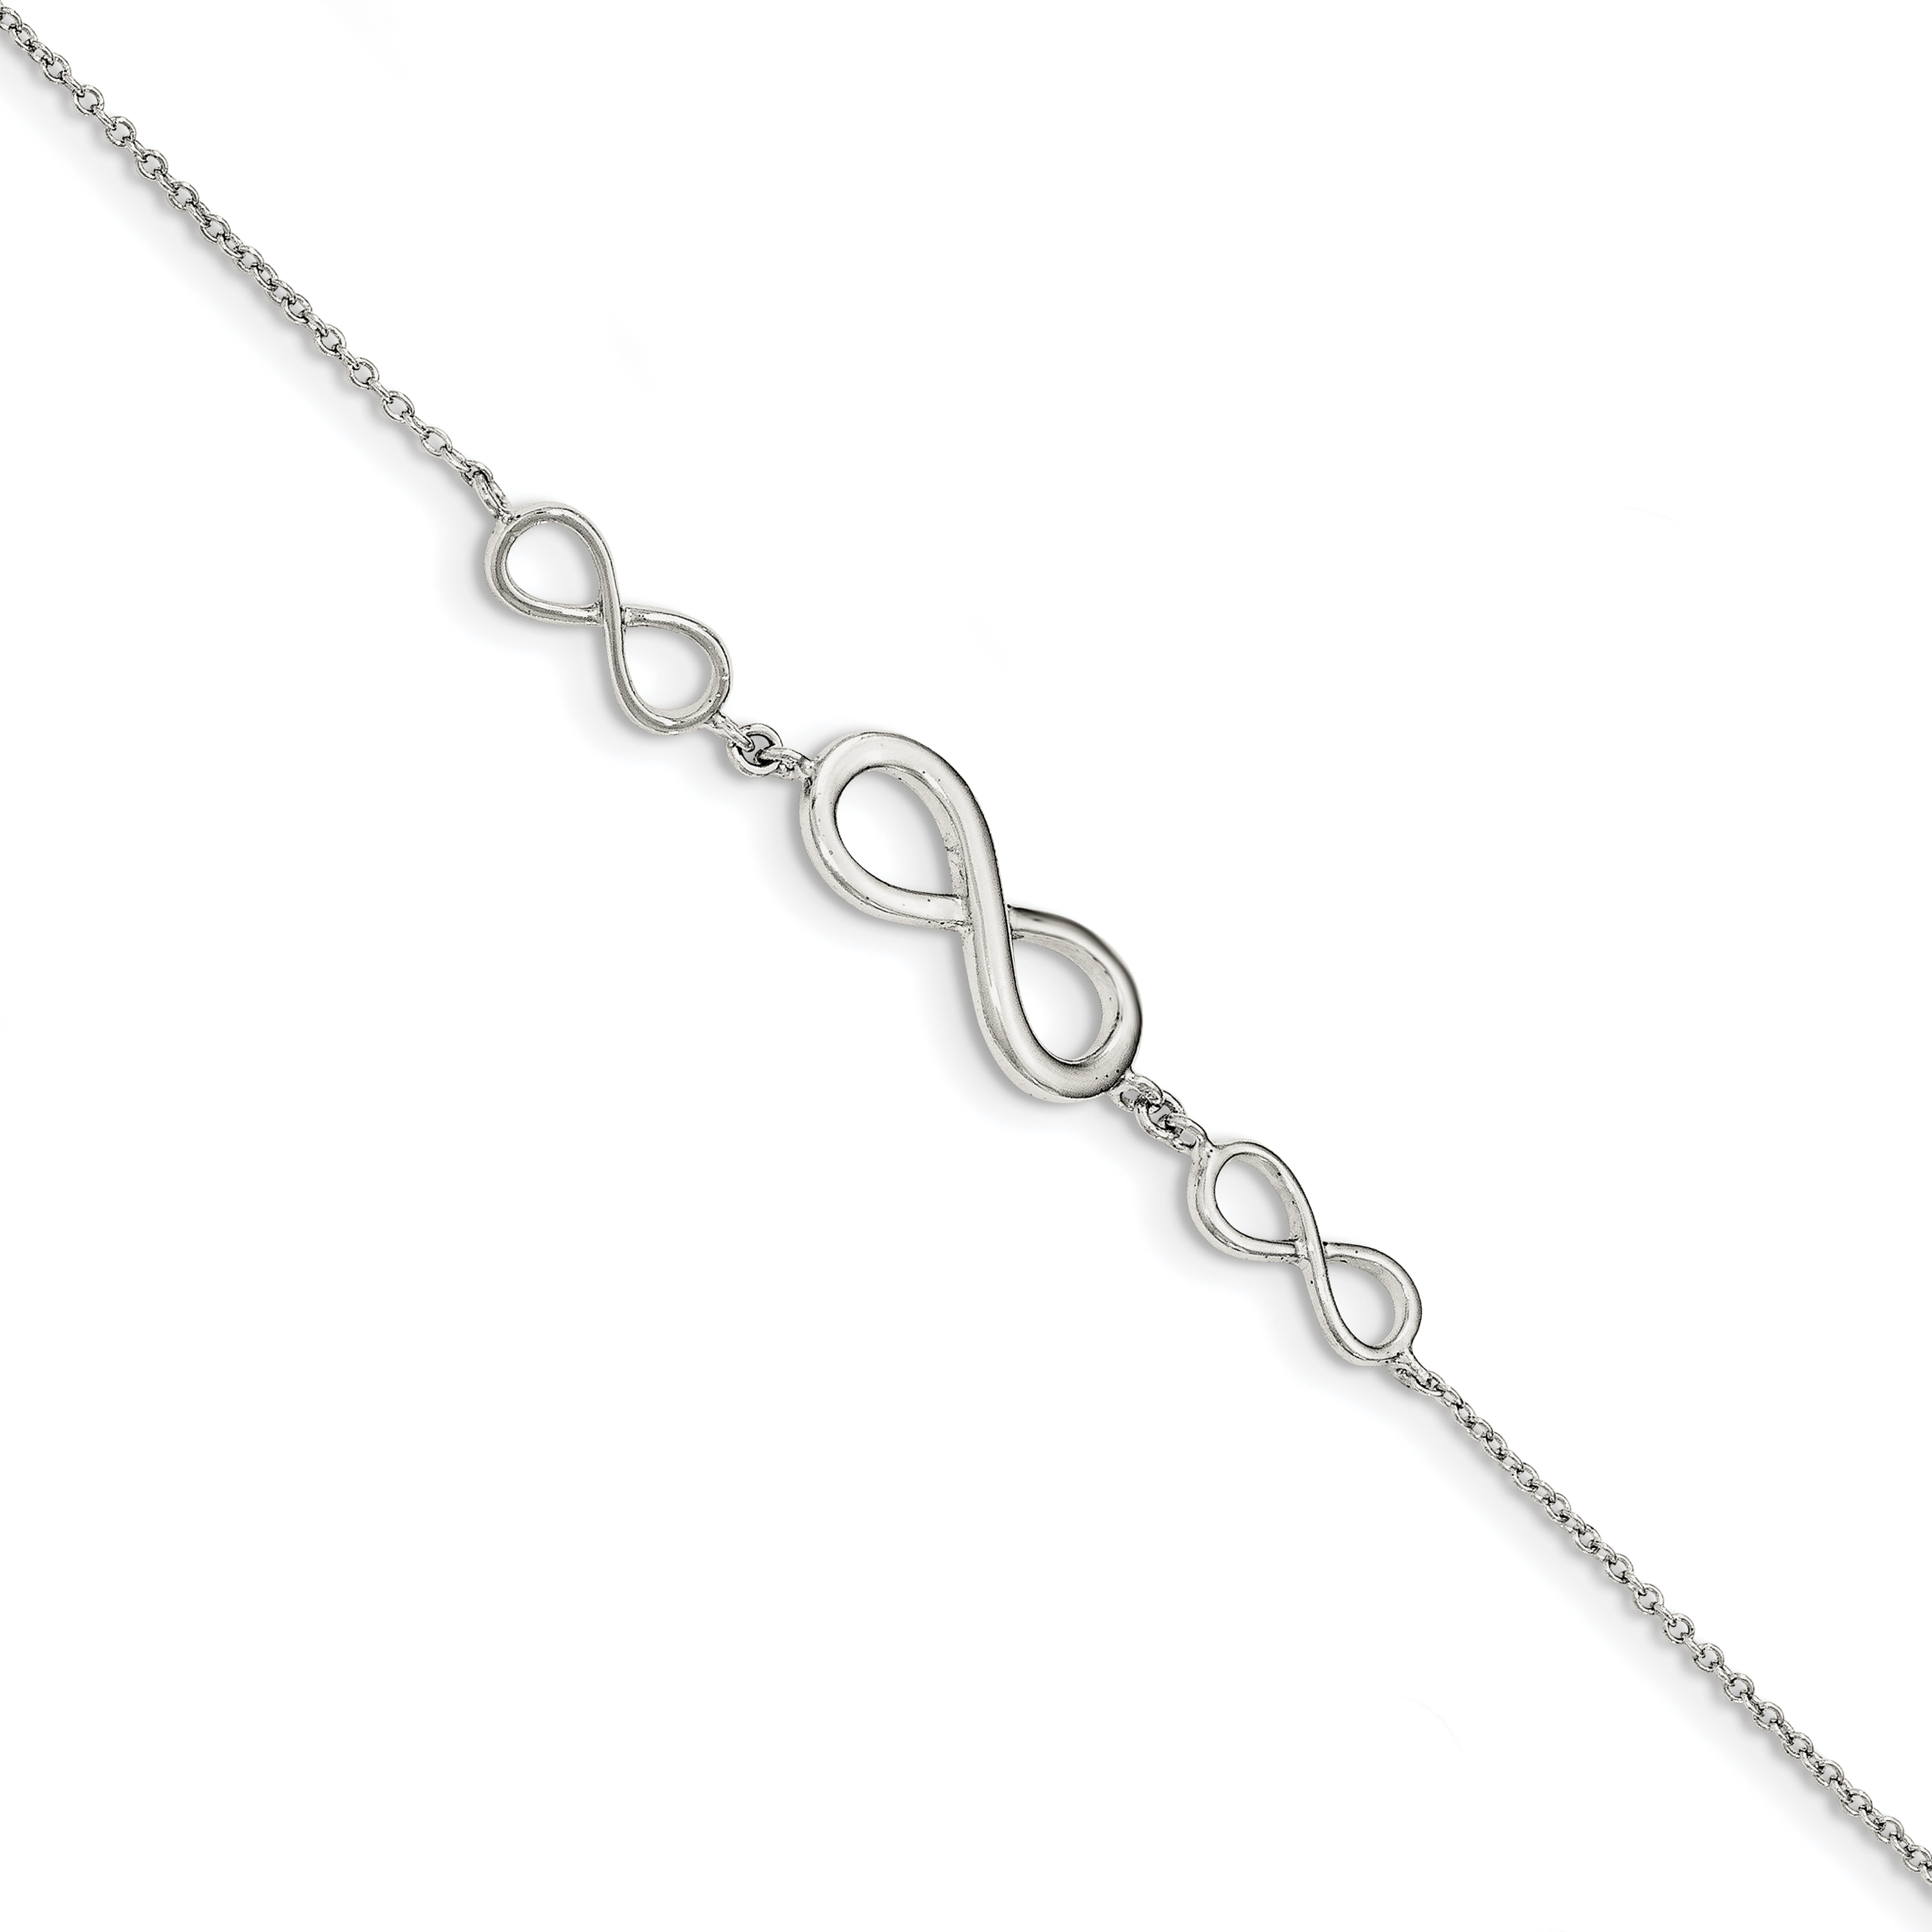 Silver Infinity Bracelet With//Without Gift Box Ideal Present Gift